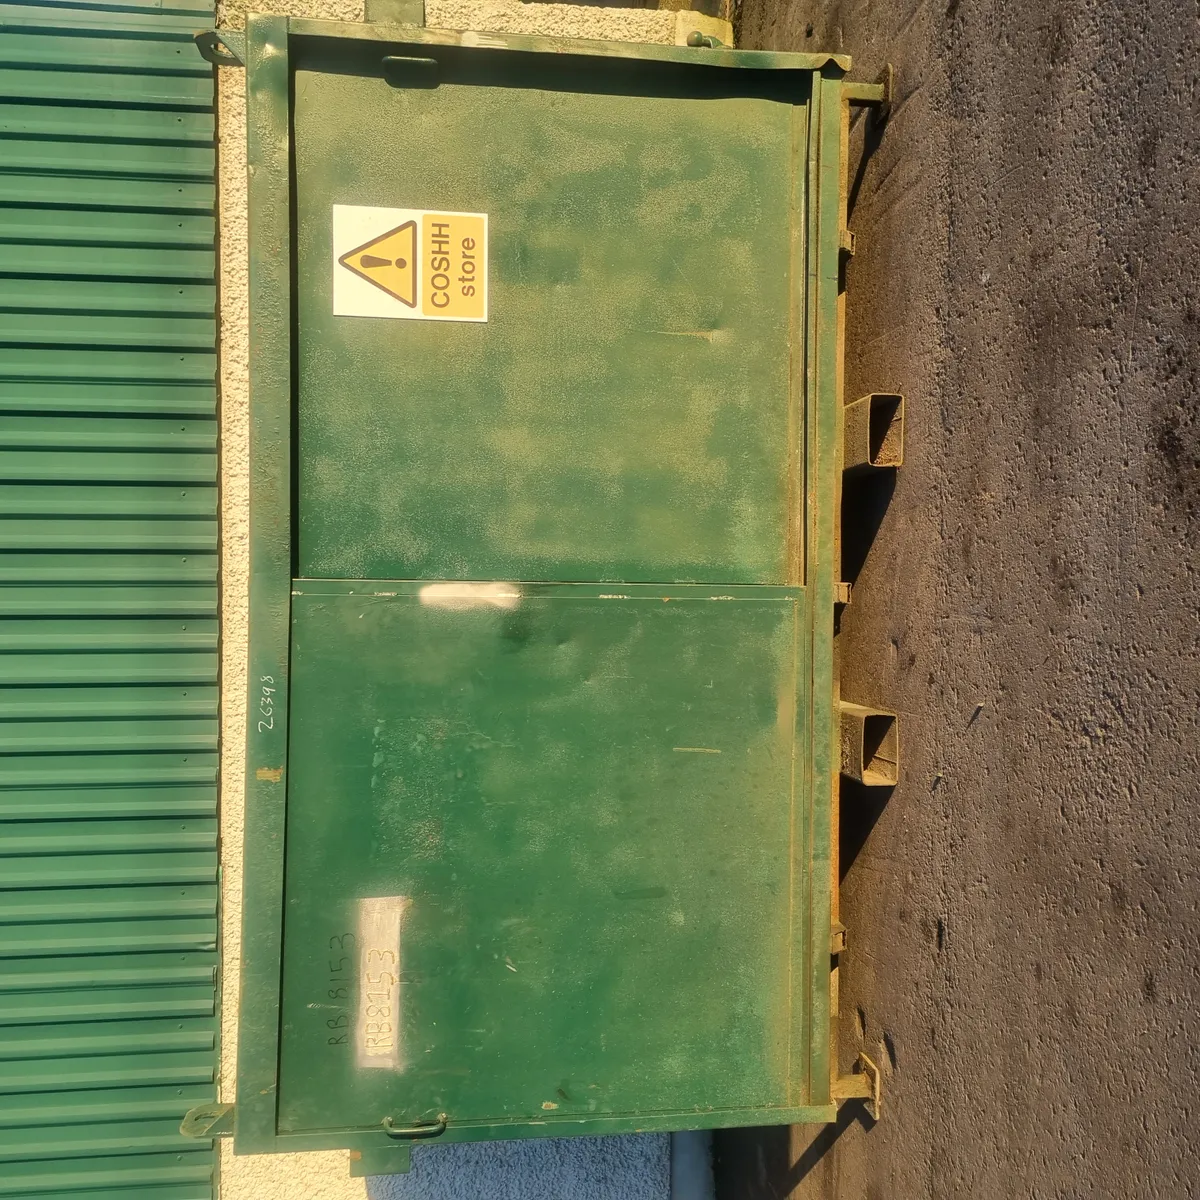 Cosh Cemical Cabinet For Sale